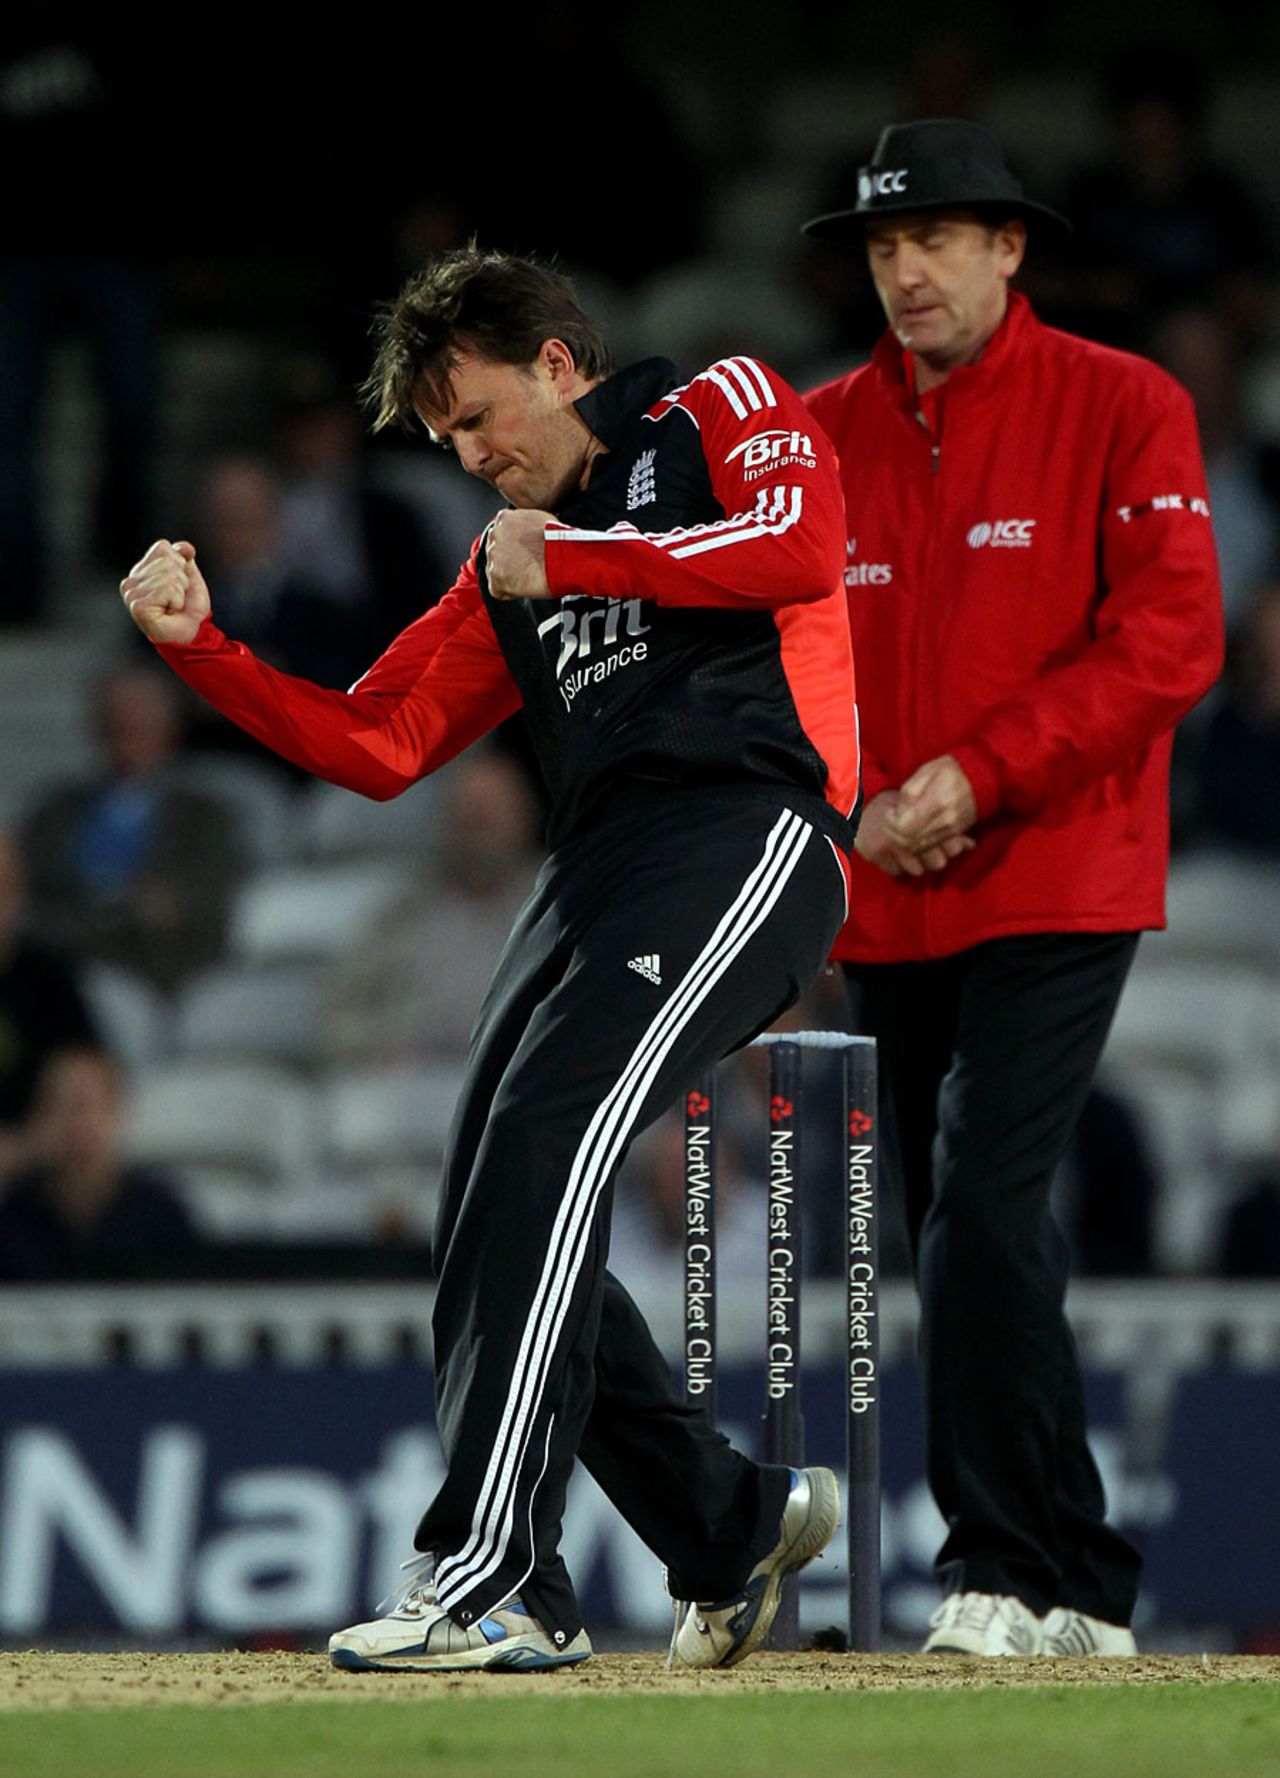 Graeme Swann took his first wicket as England captain, England v West Indies, 1st Twenty20, The Oval, September 23, 2011